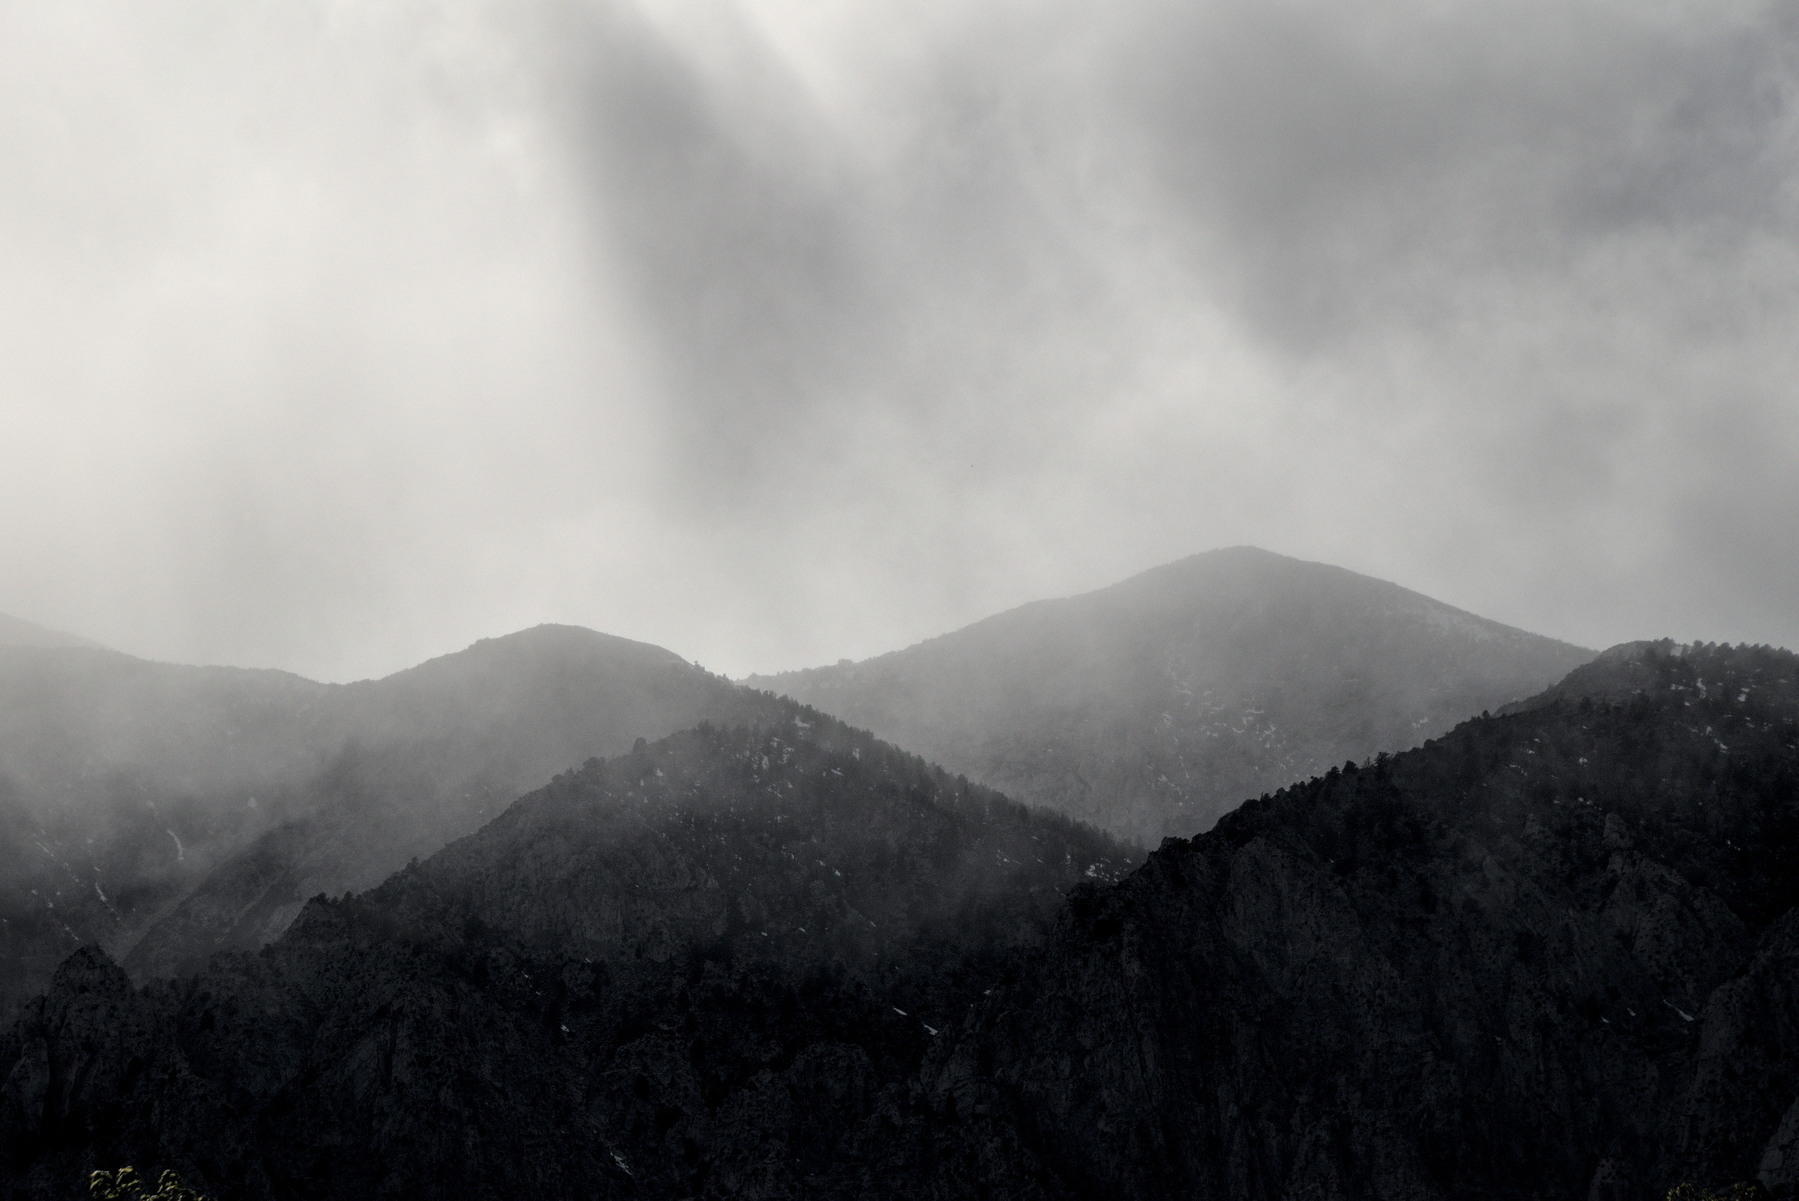 Layered mountain ranges, fading from black to grey.